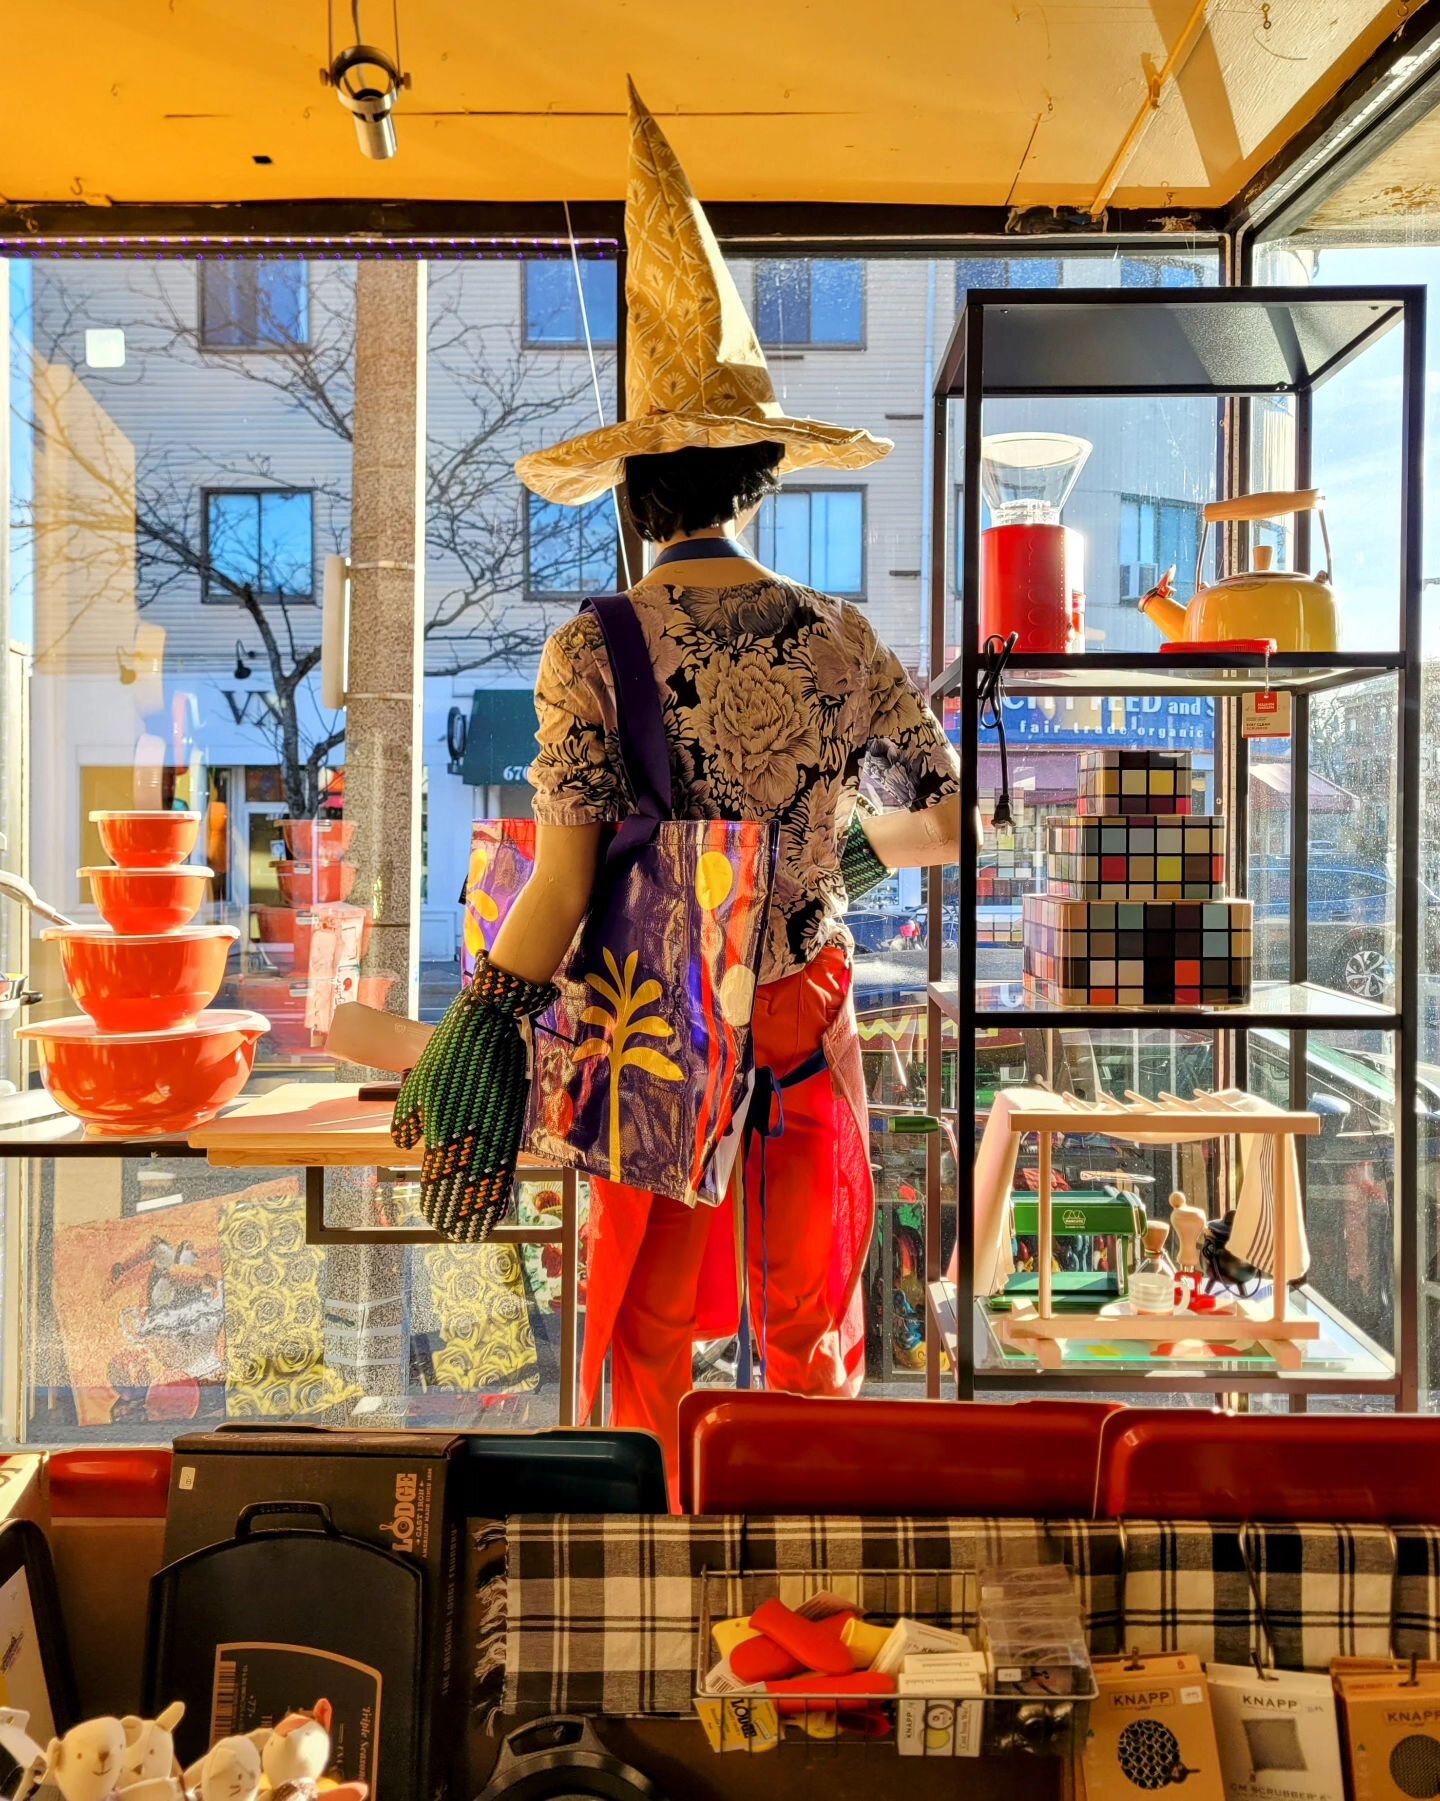 Last minute shopping officially begins today, but don't you fret, you don't have to pick through the dregs, we've got shelves stocked and stacked with amazing gifts and so much more. 

Kitchenwitch is open today 10-6 and tomorrow, xmas eve, 10-4. But